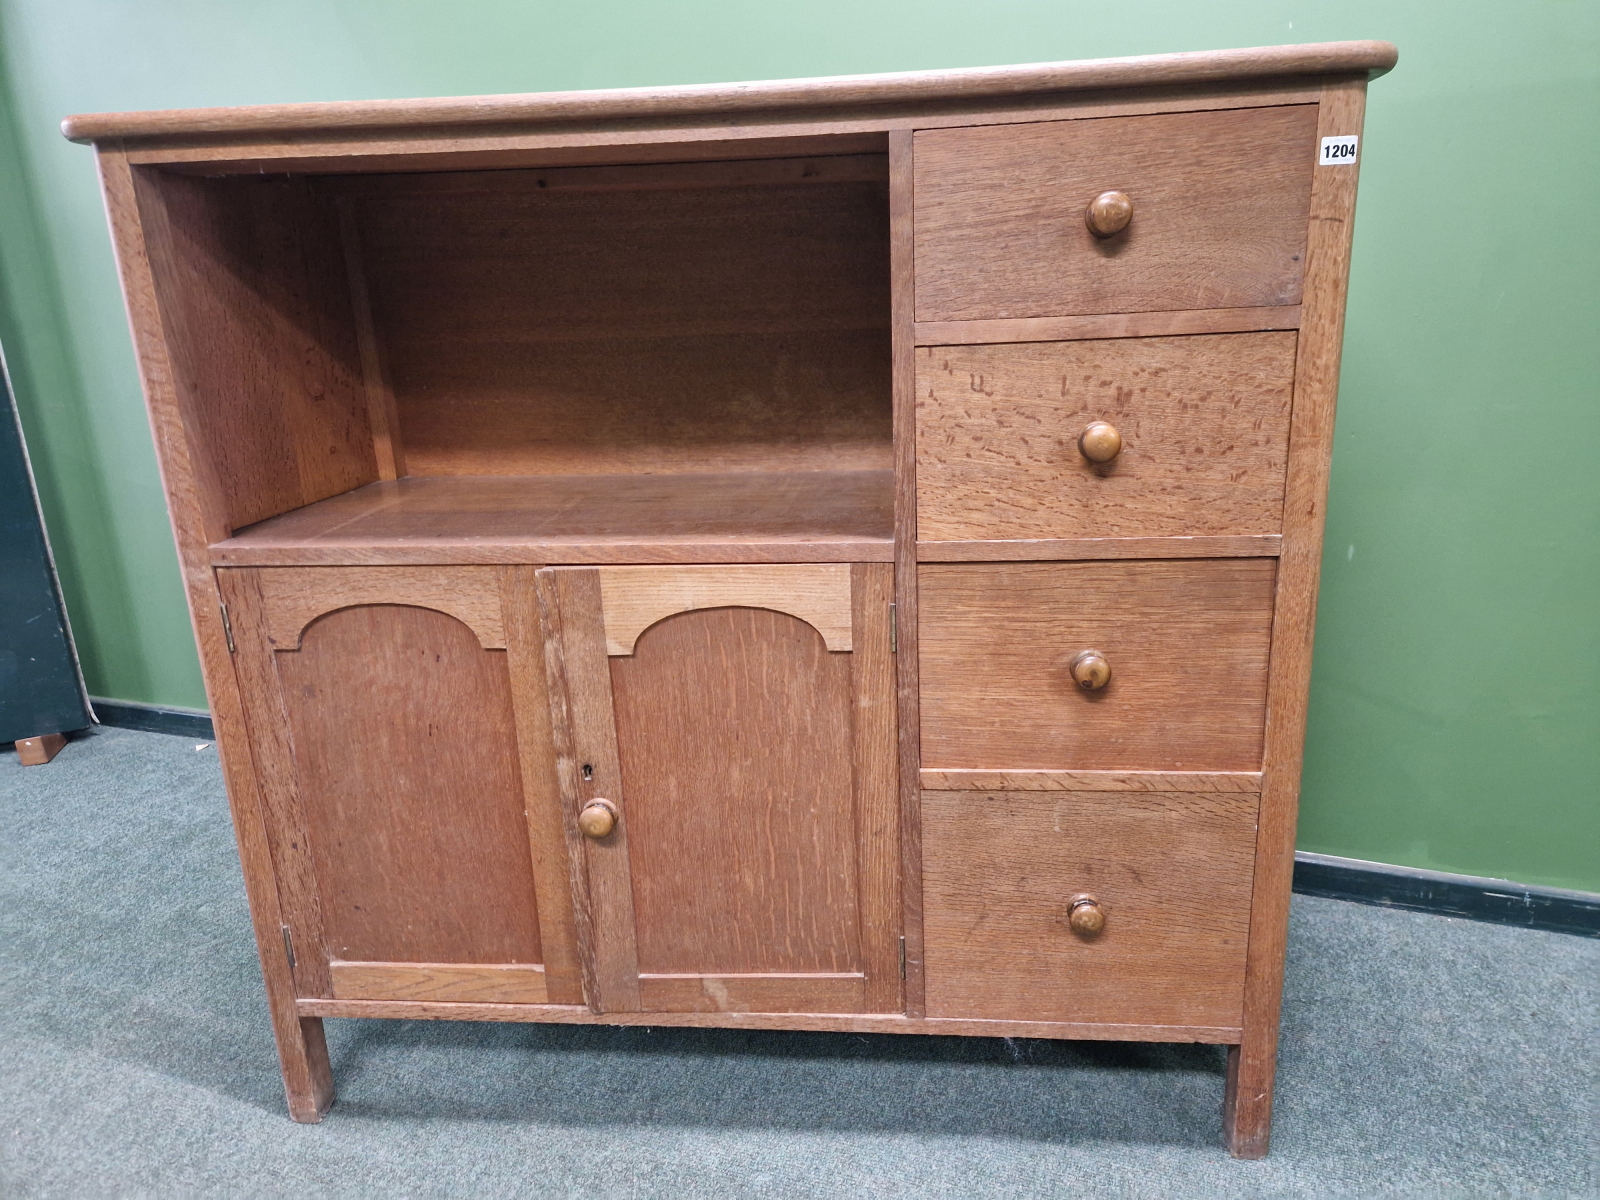 AN ARTS AND CRAFTS STYLE OAK SIDE CABINET IN THE MANNER OF HEALS. - Image 2 of 6